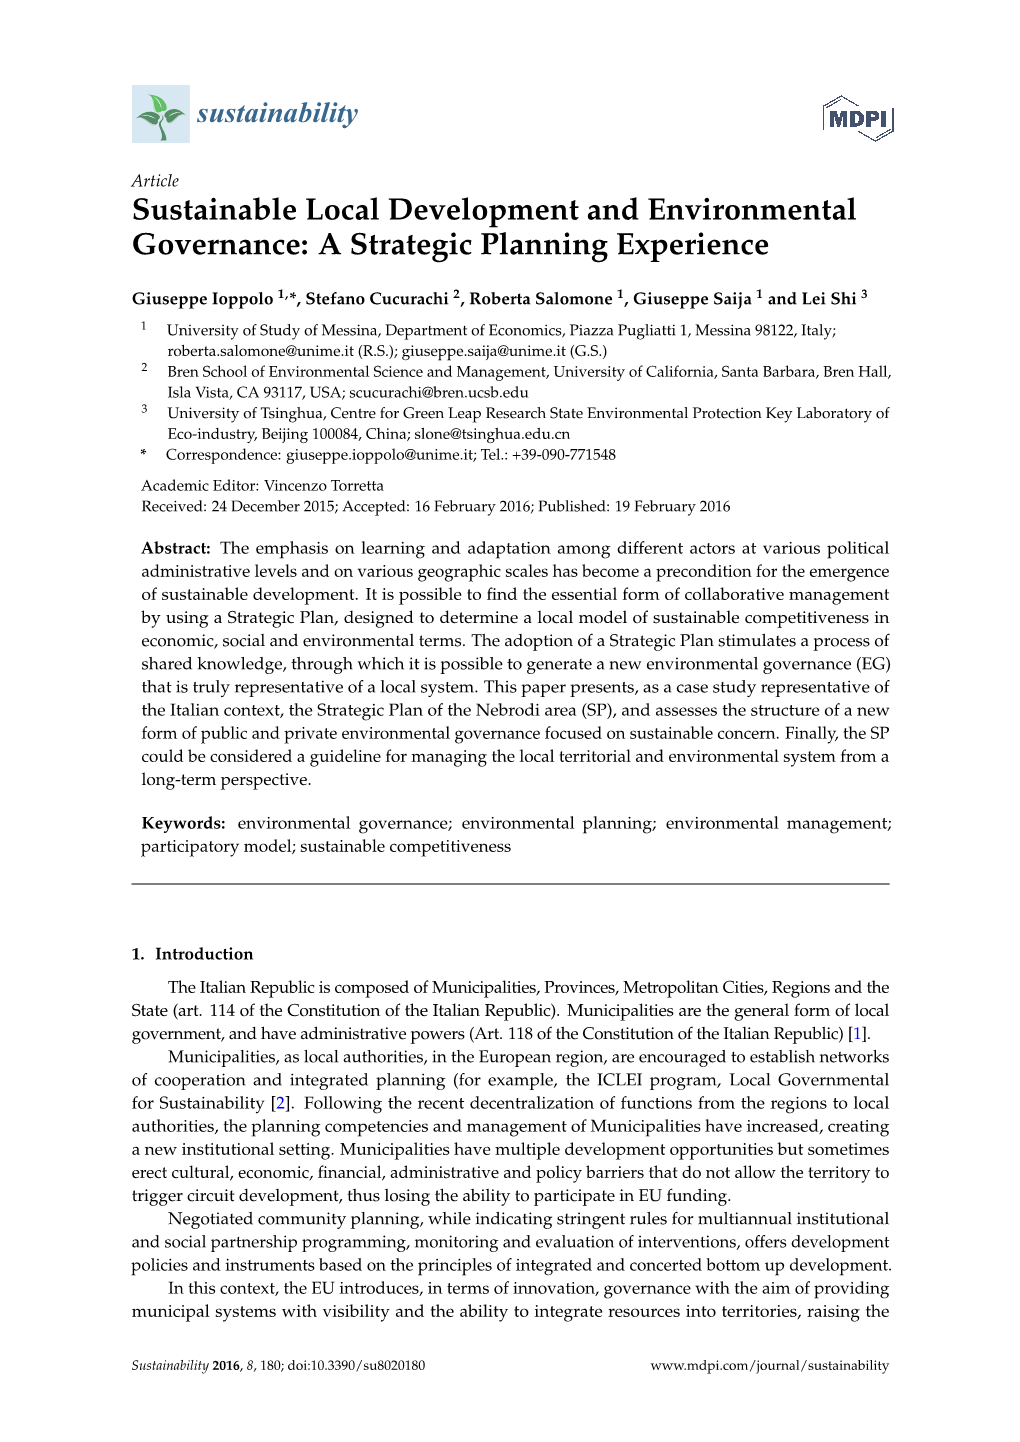 Sustainable Local Development and Environmental Governance: a Strategic Planning Experience